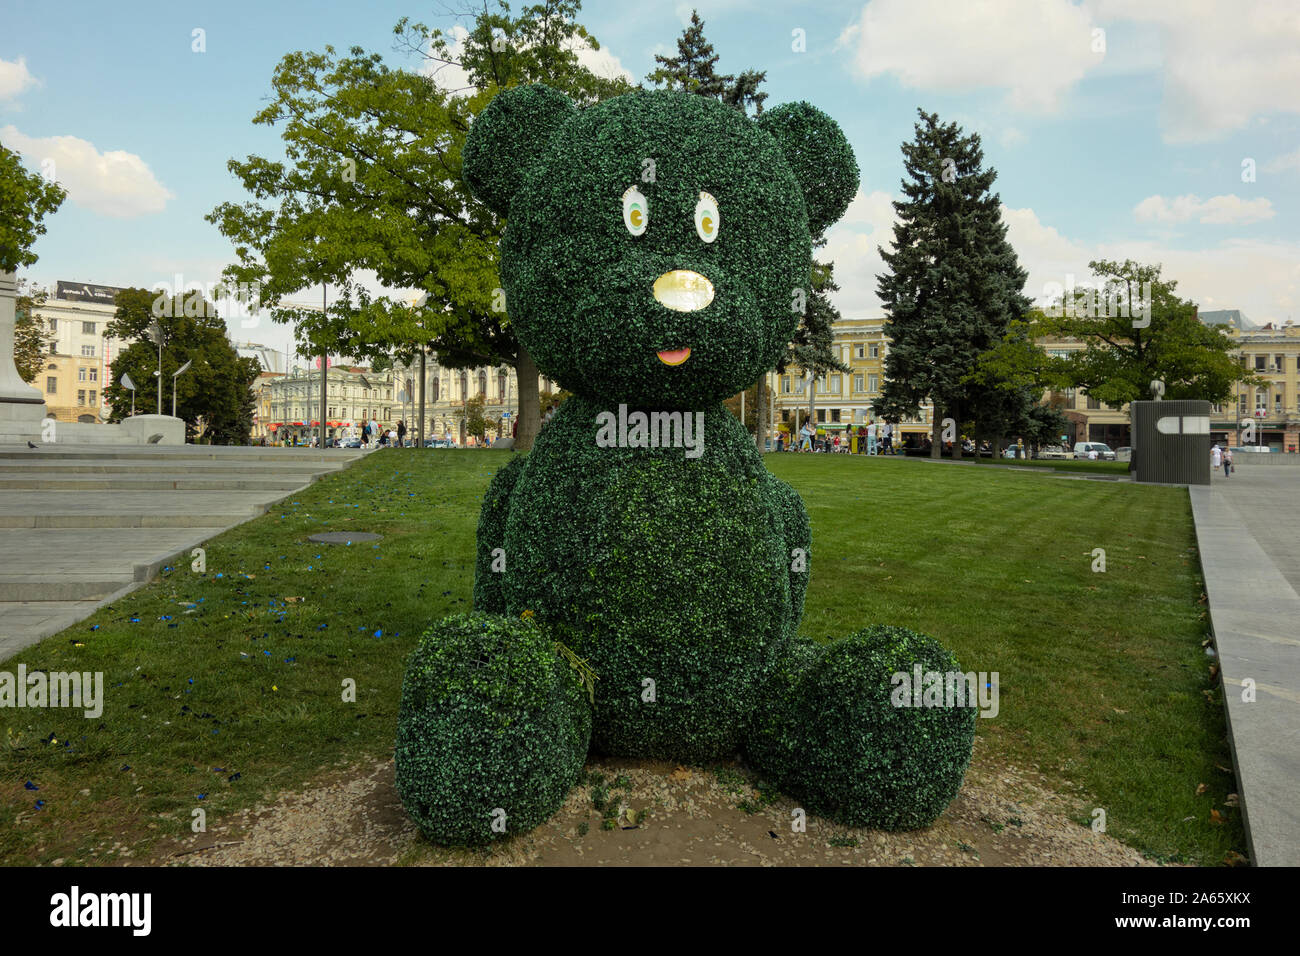 Kharkiv, Ukraine, August 2019 Big teddy bear topiary figure in city park. Outdoor fun decoration from green plant and bushes. Kids entertainment place Stock Photo